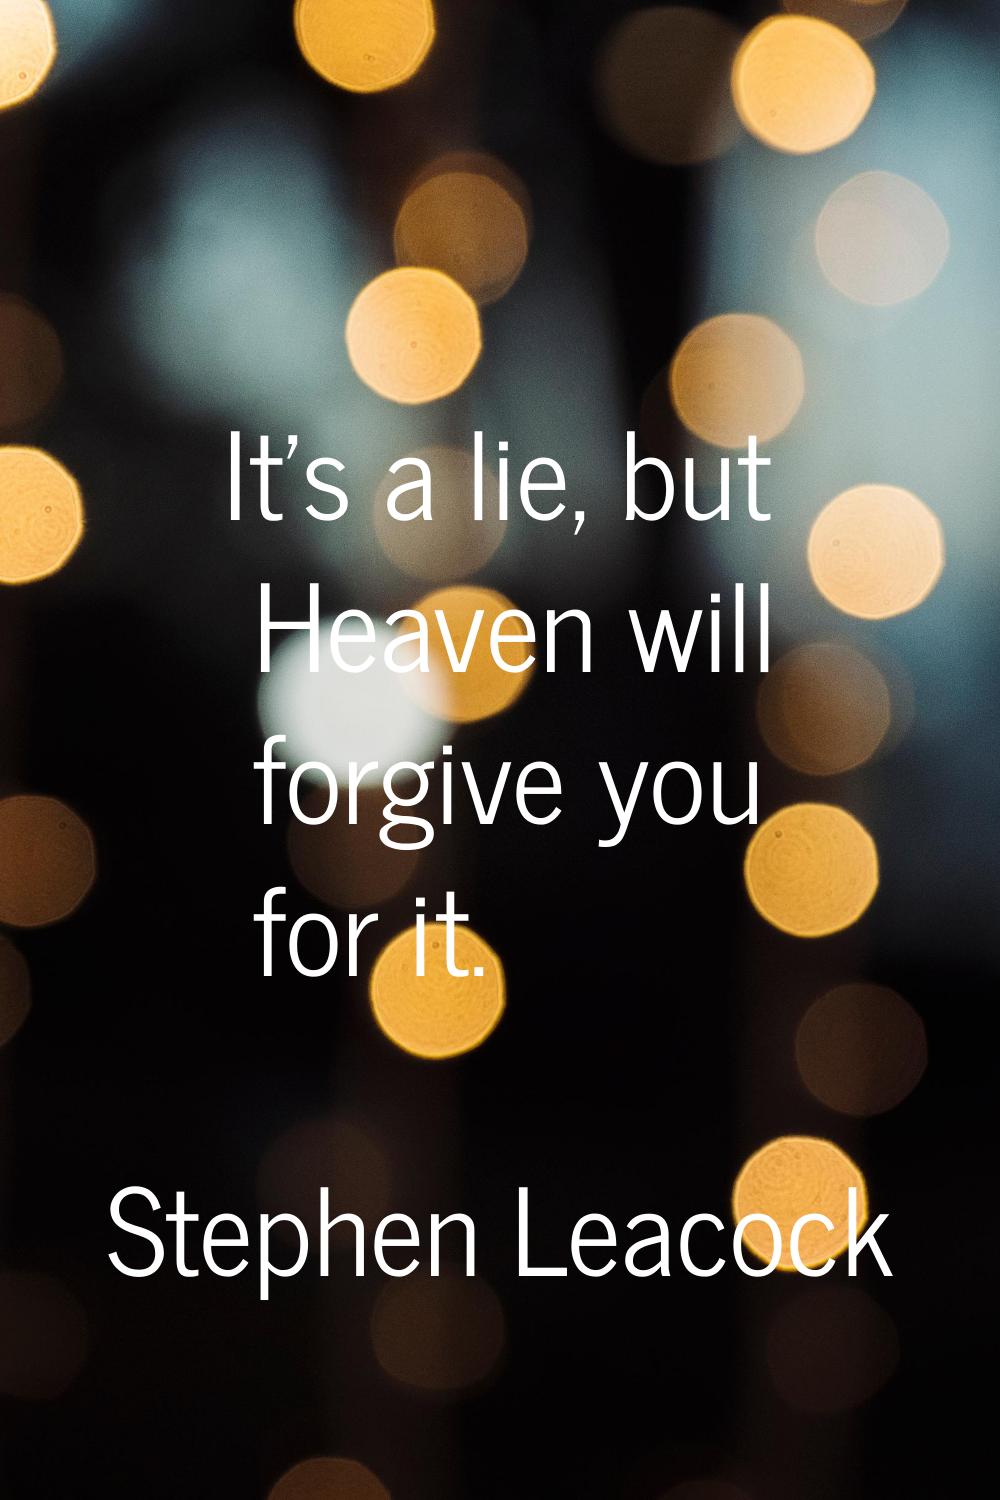 It's a lie, but Heaven will forgive you for it.